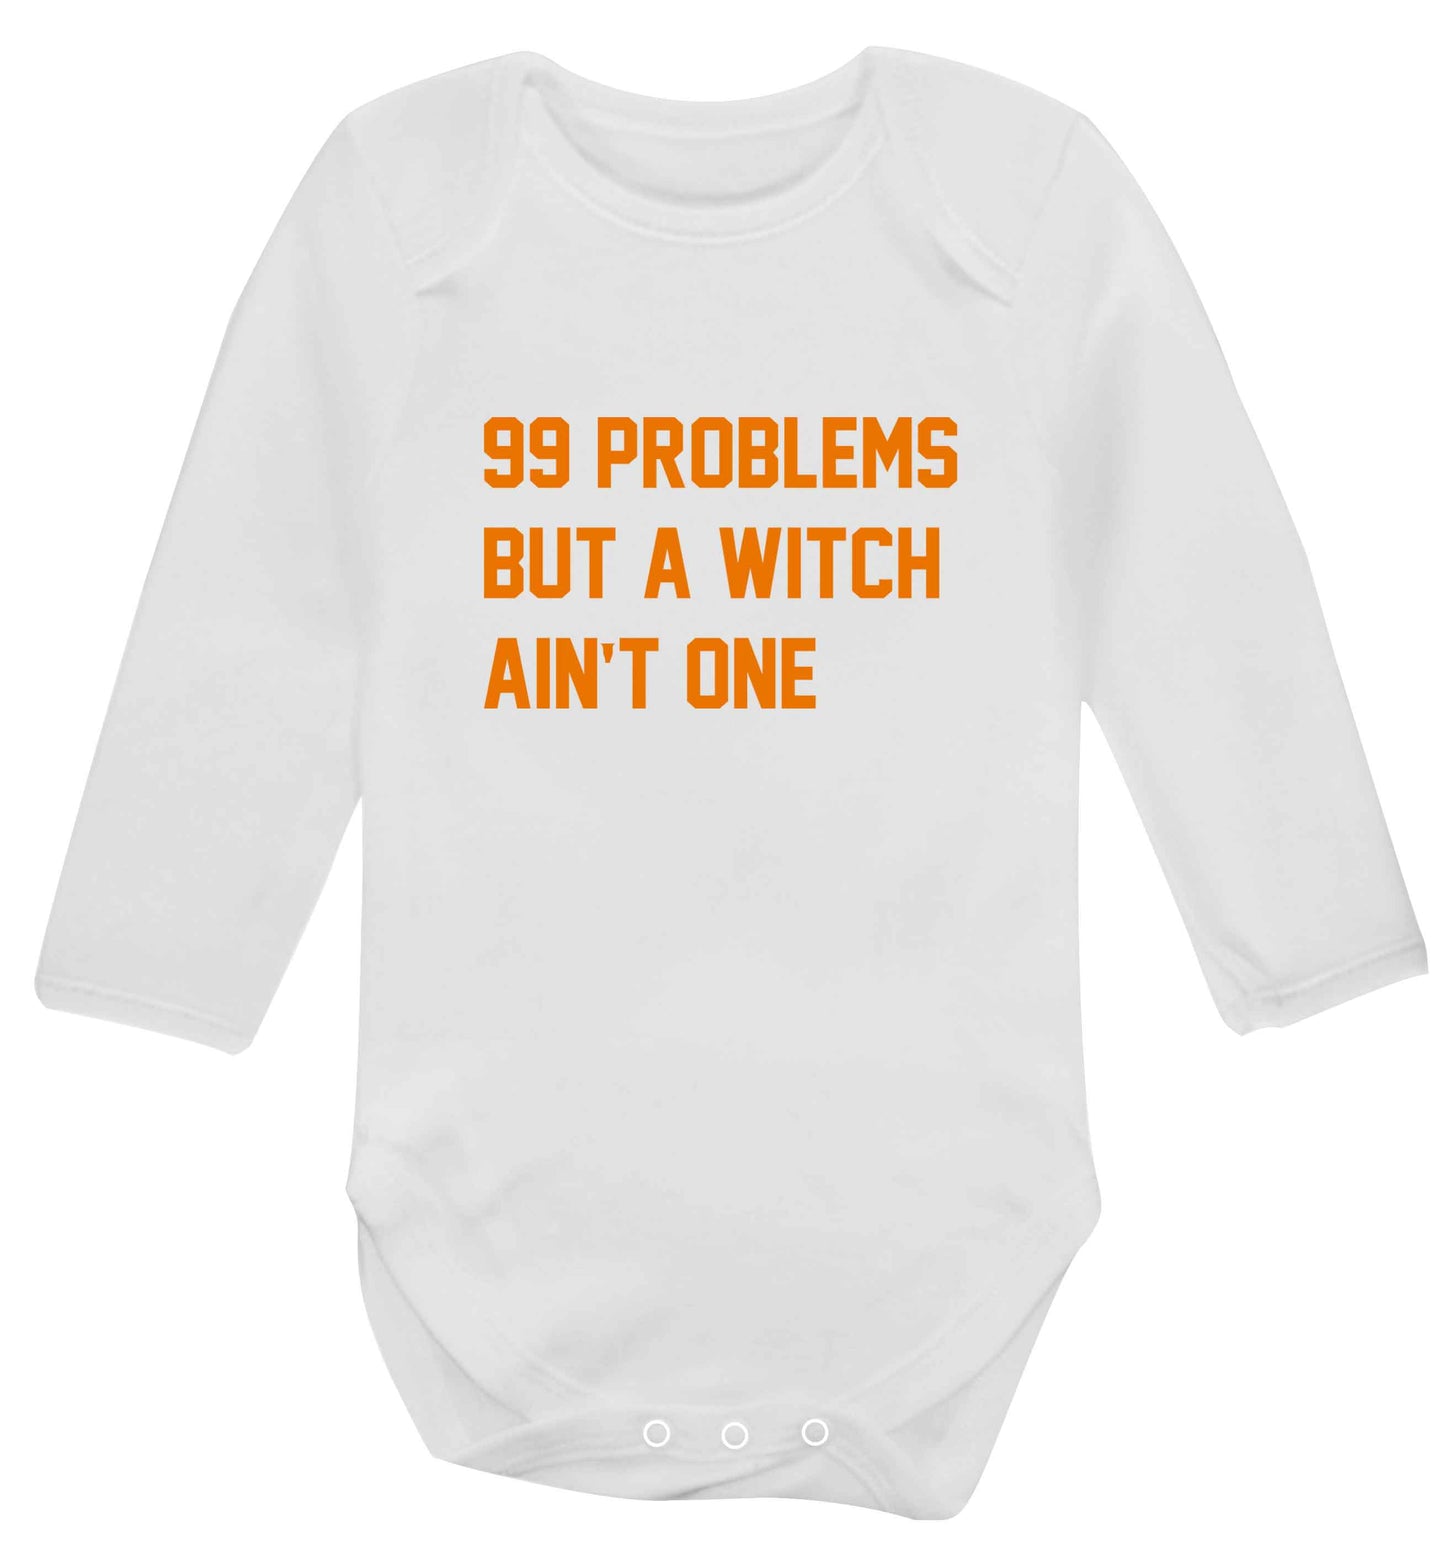 99 Problems but a witch aint one baby vest long sleeved white 6-12 months